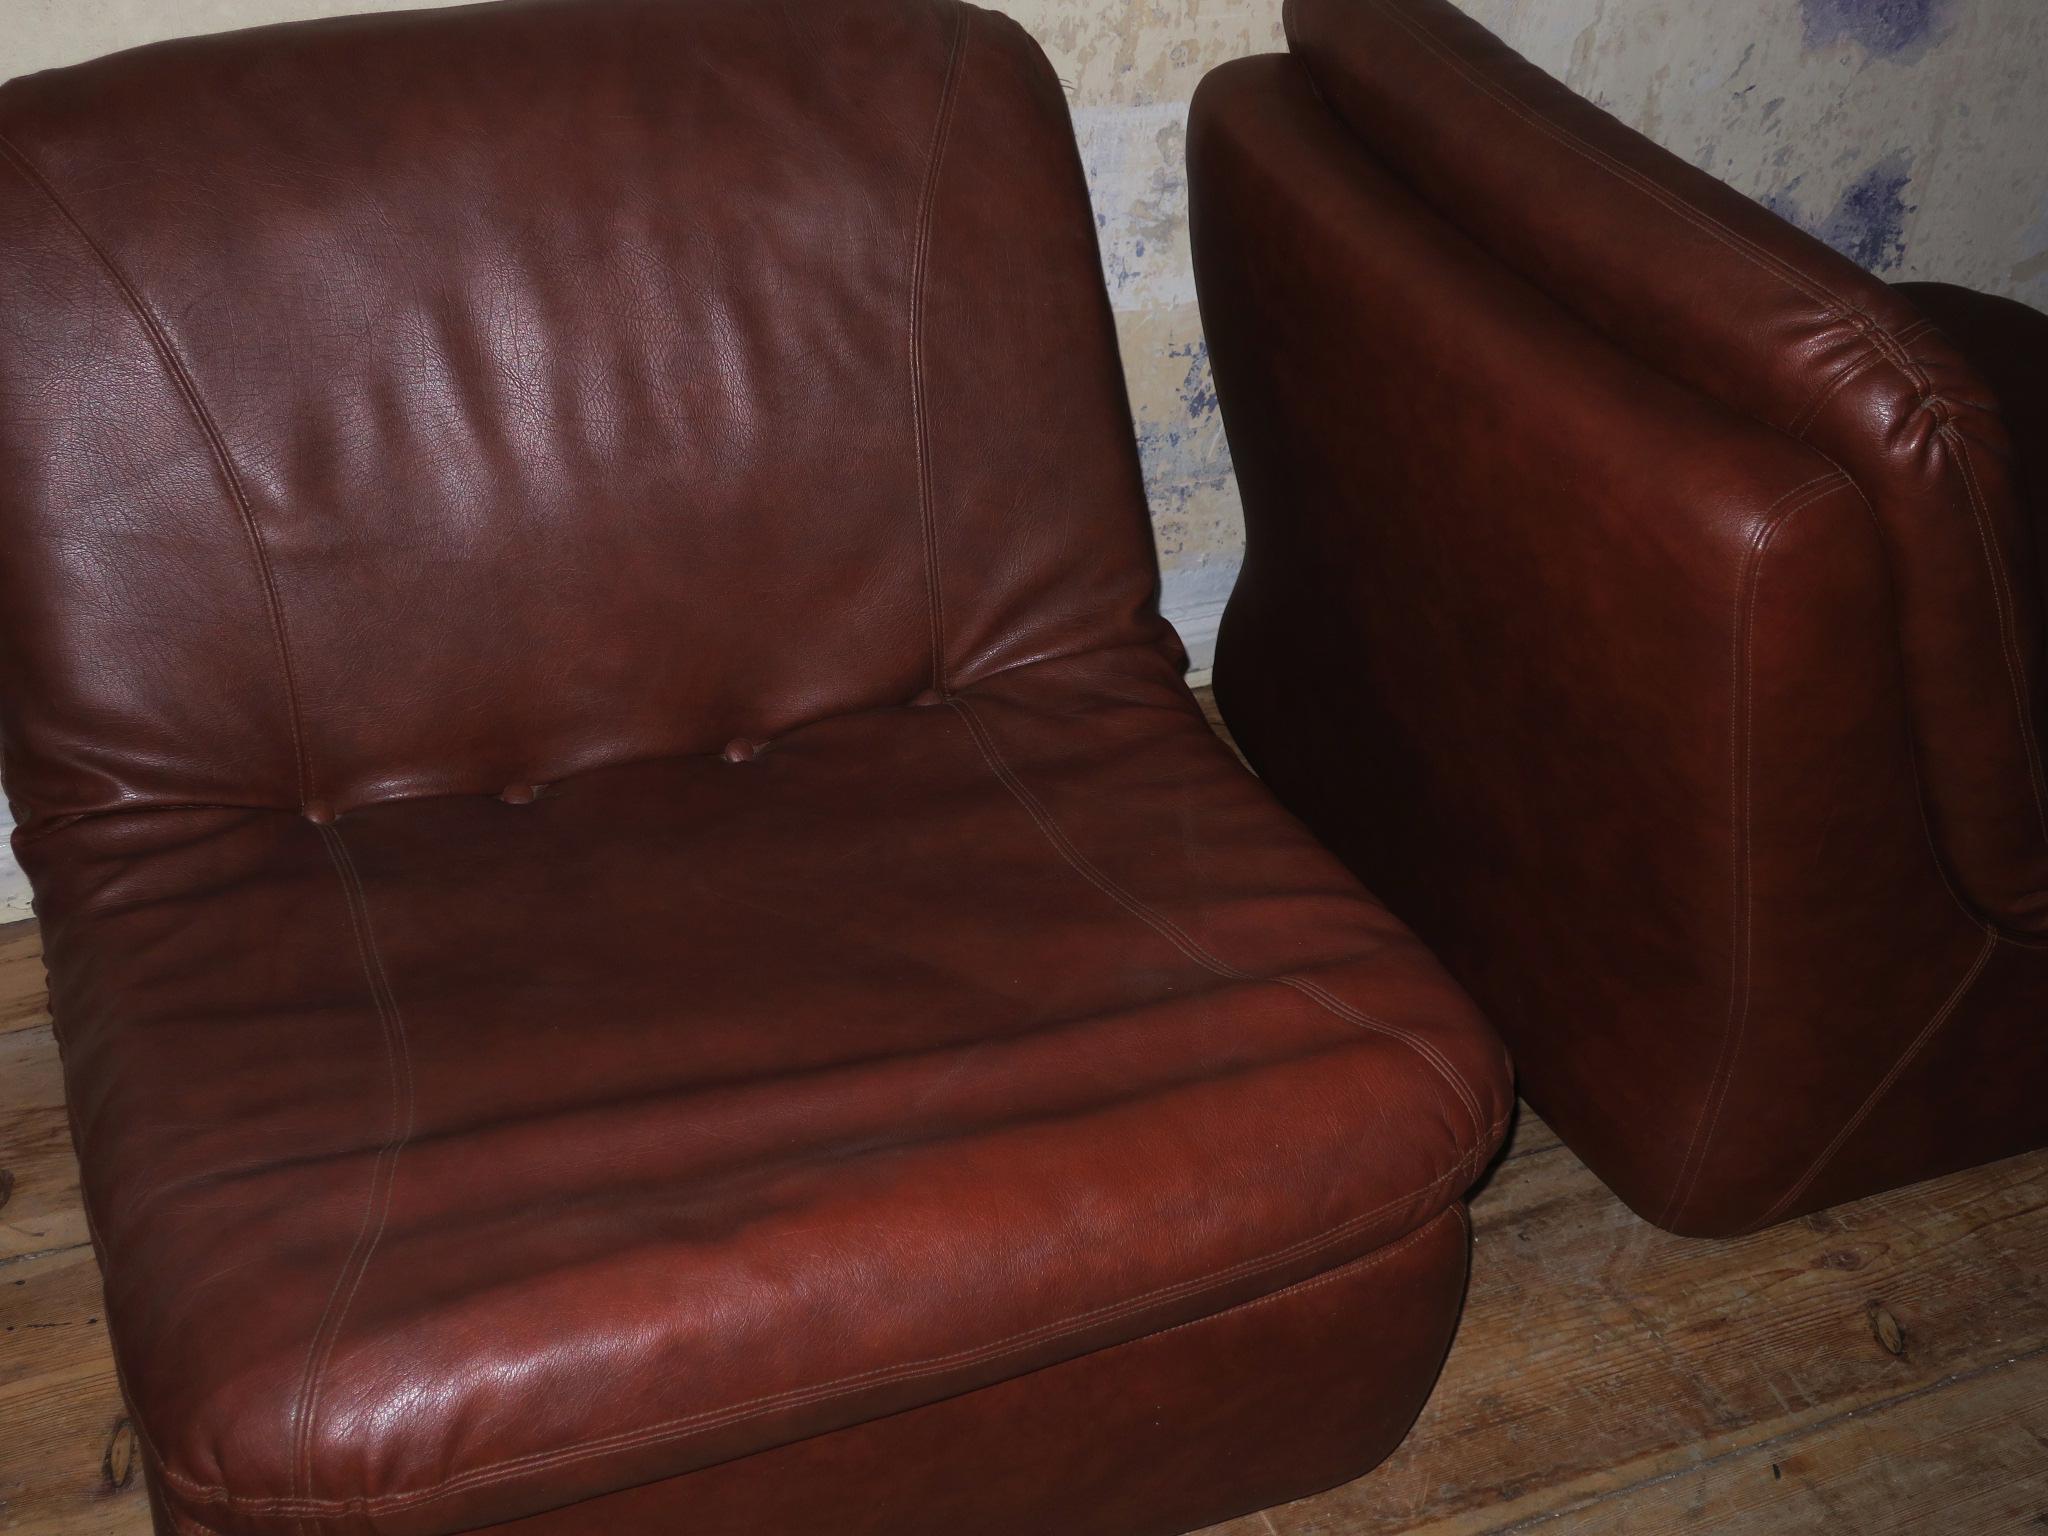 Midcentury pair of modular sofa elements in brown leather dating from 1960s-1970s.
Very good vintage condition with minimal signs of age and use.